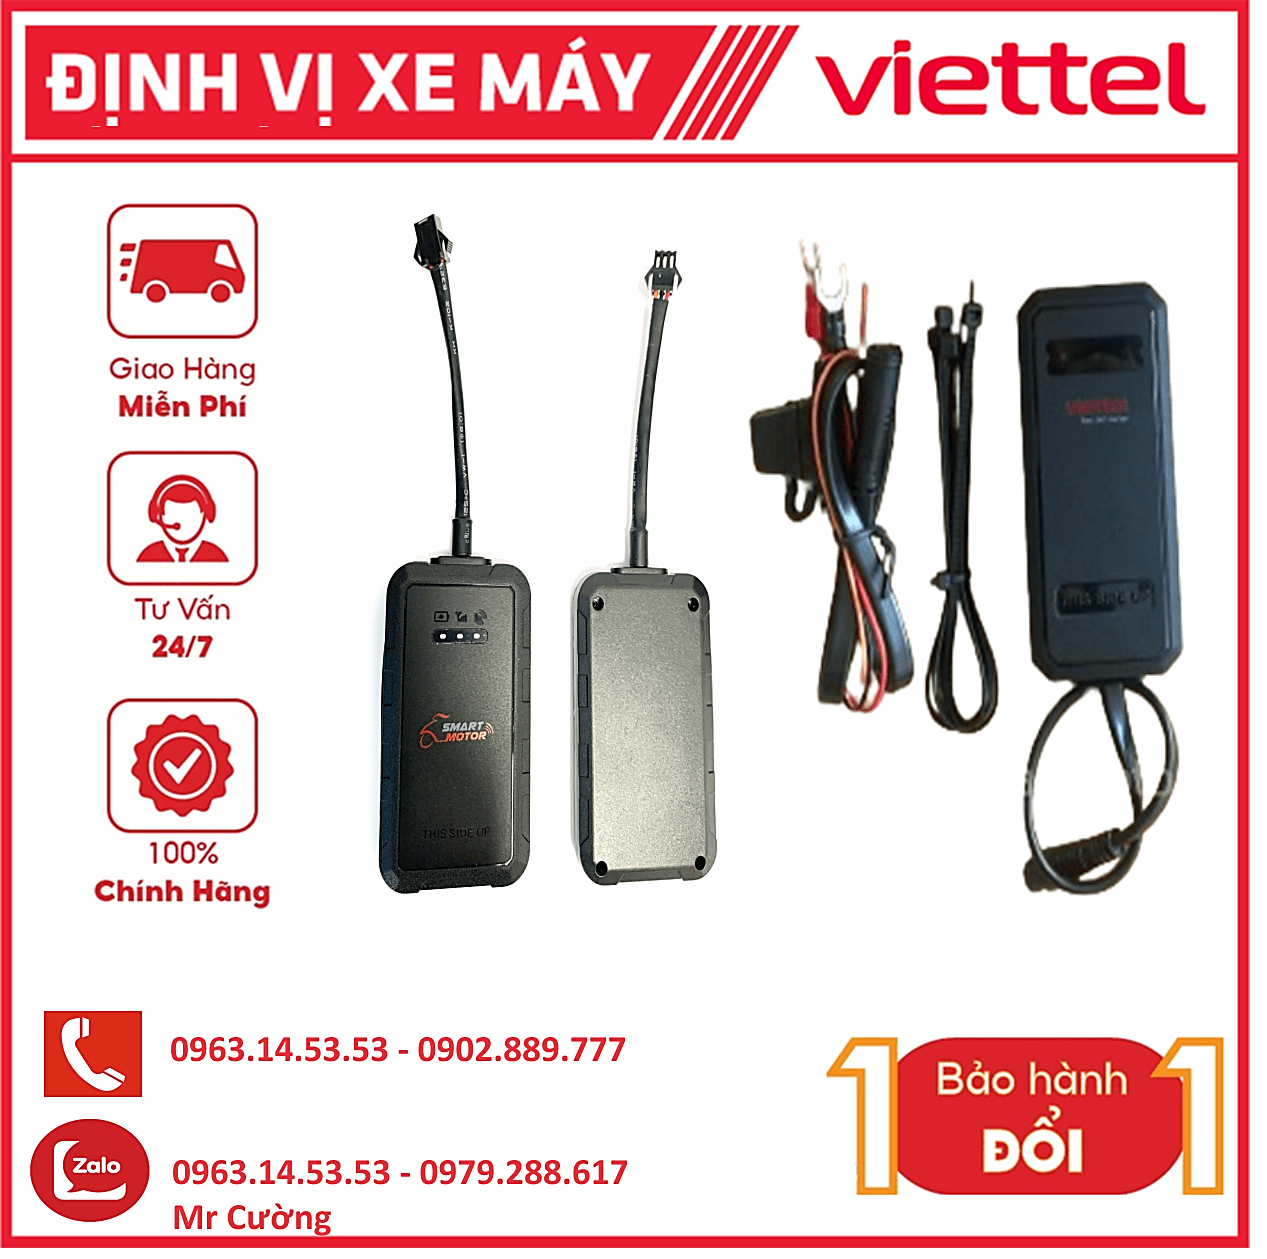 dinh vi xe may